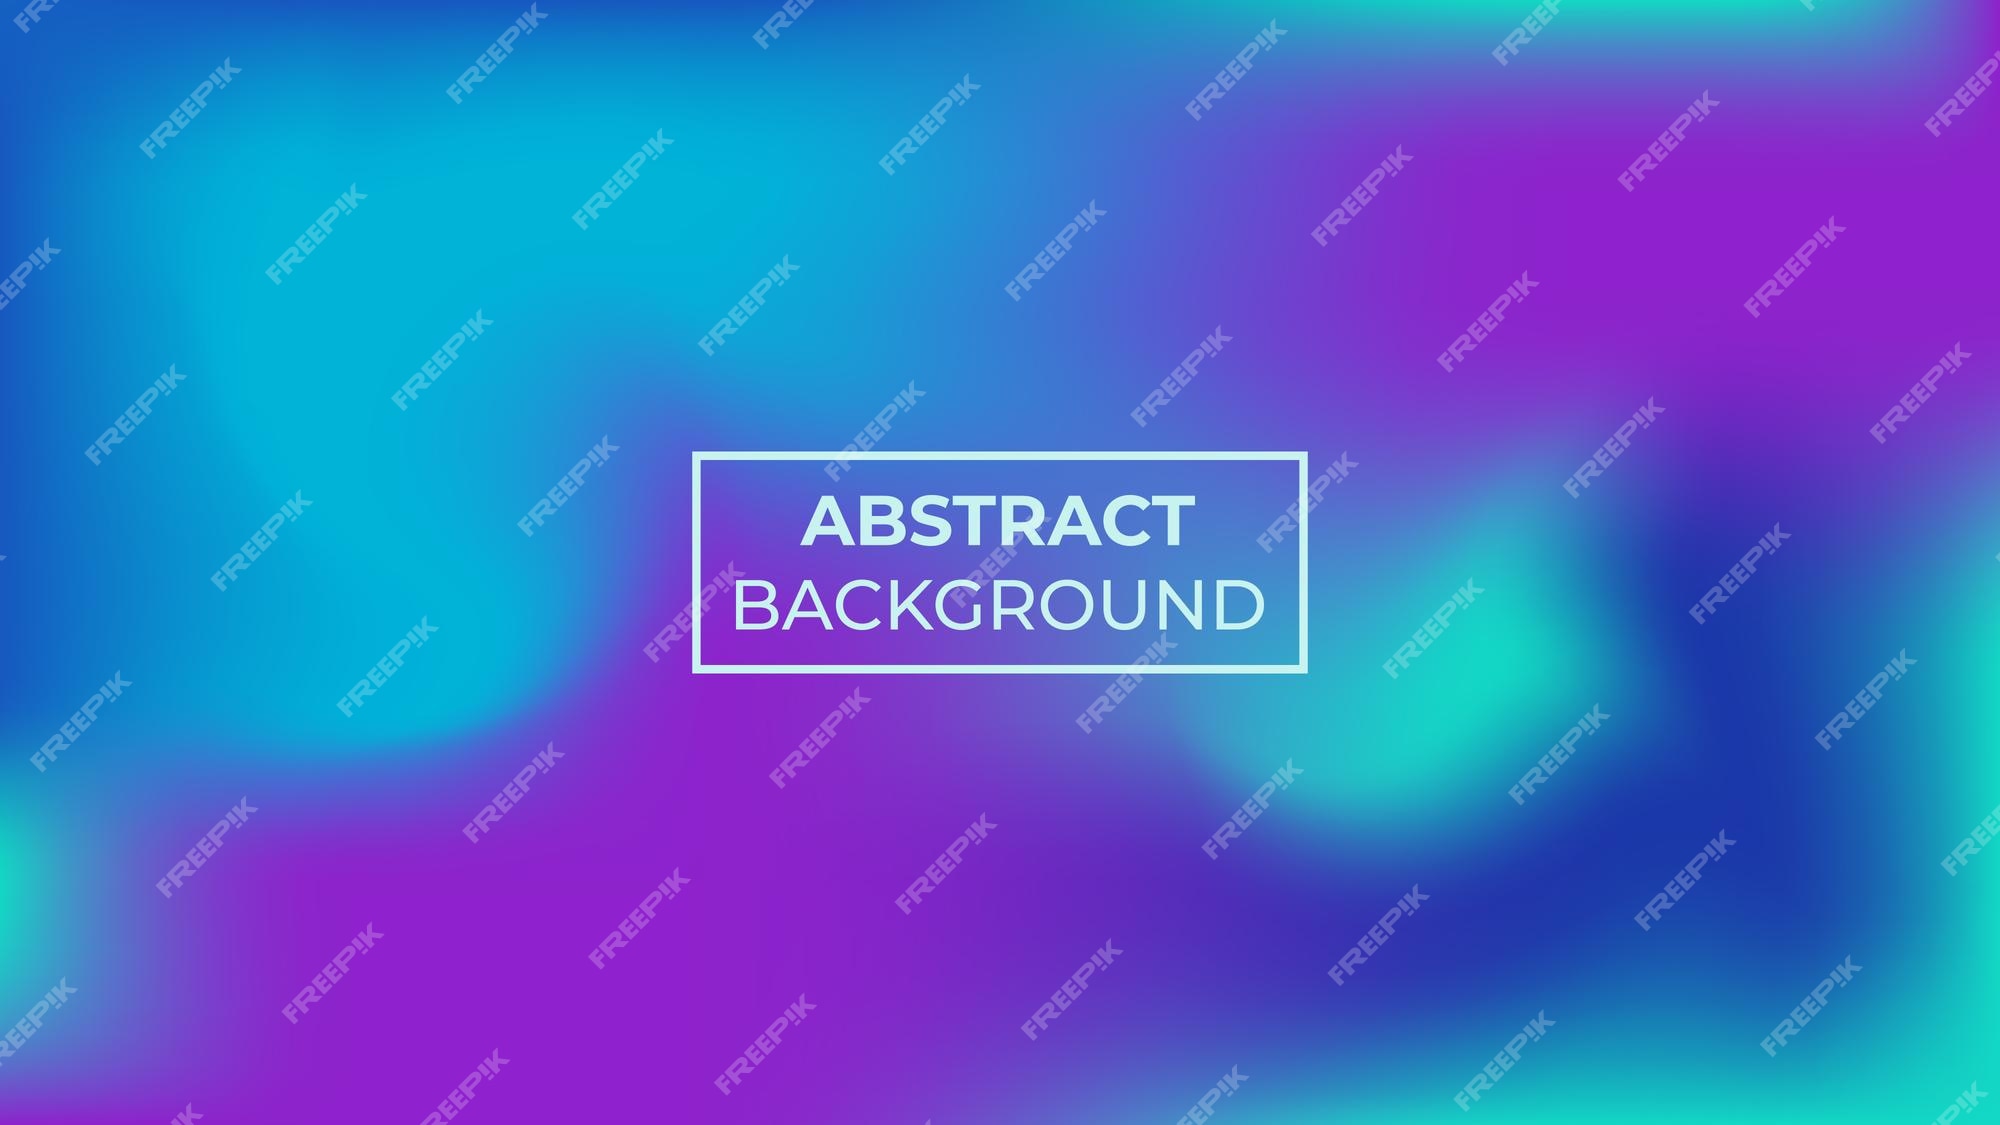 Premium Vector | Abstract background with a mix of purple and dark blue  colors easy to edit